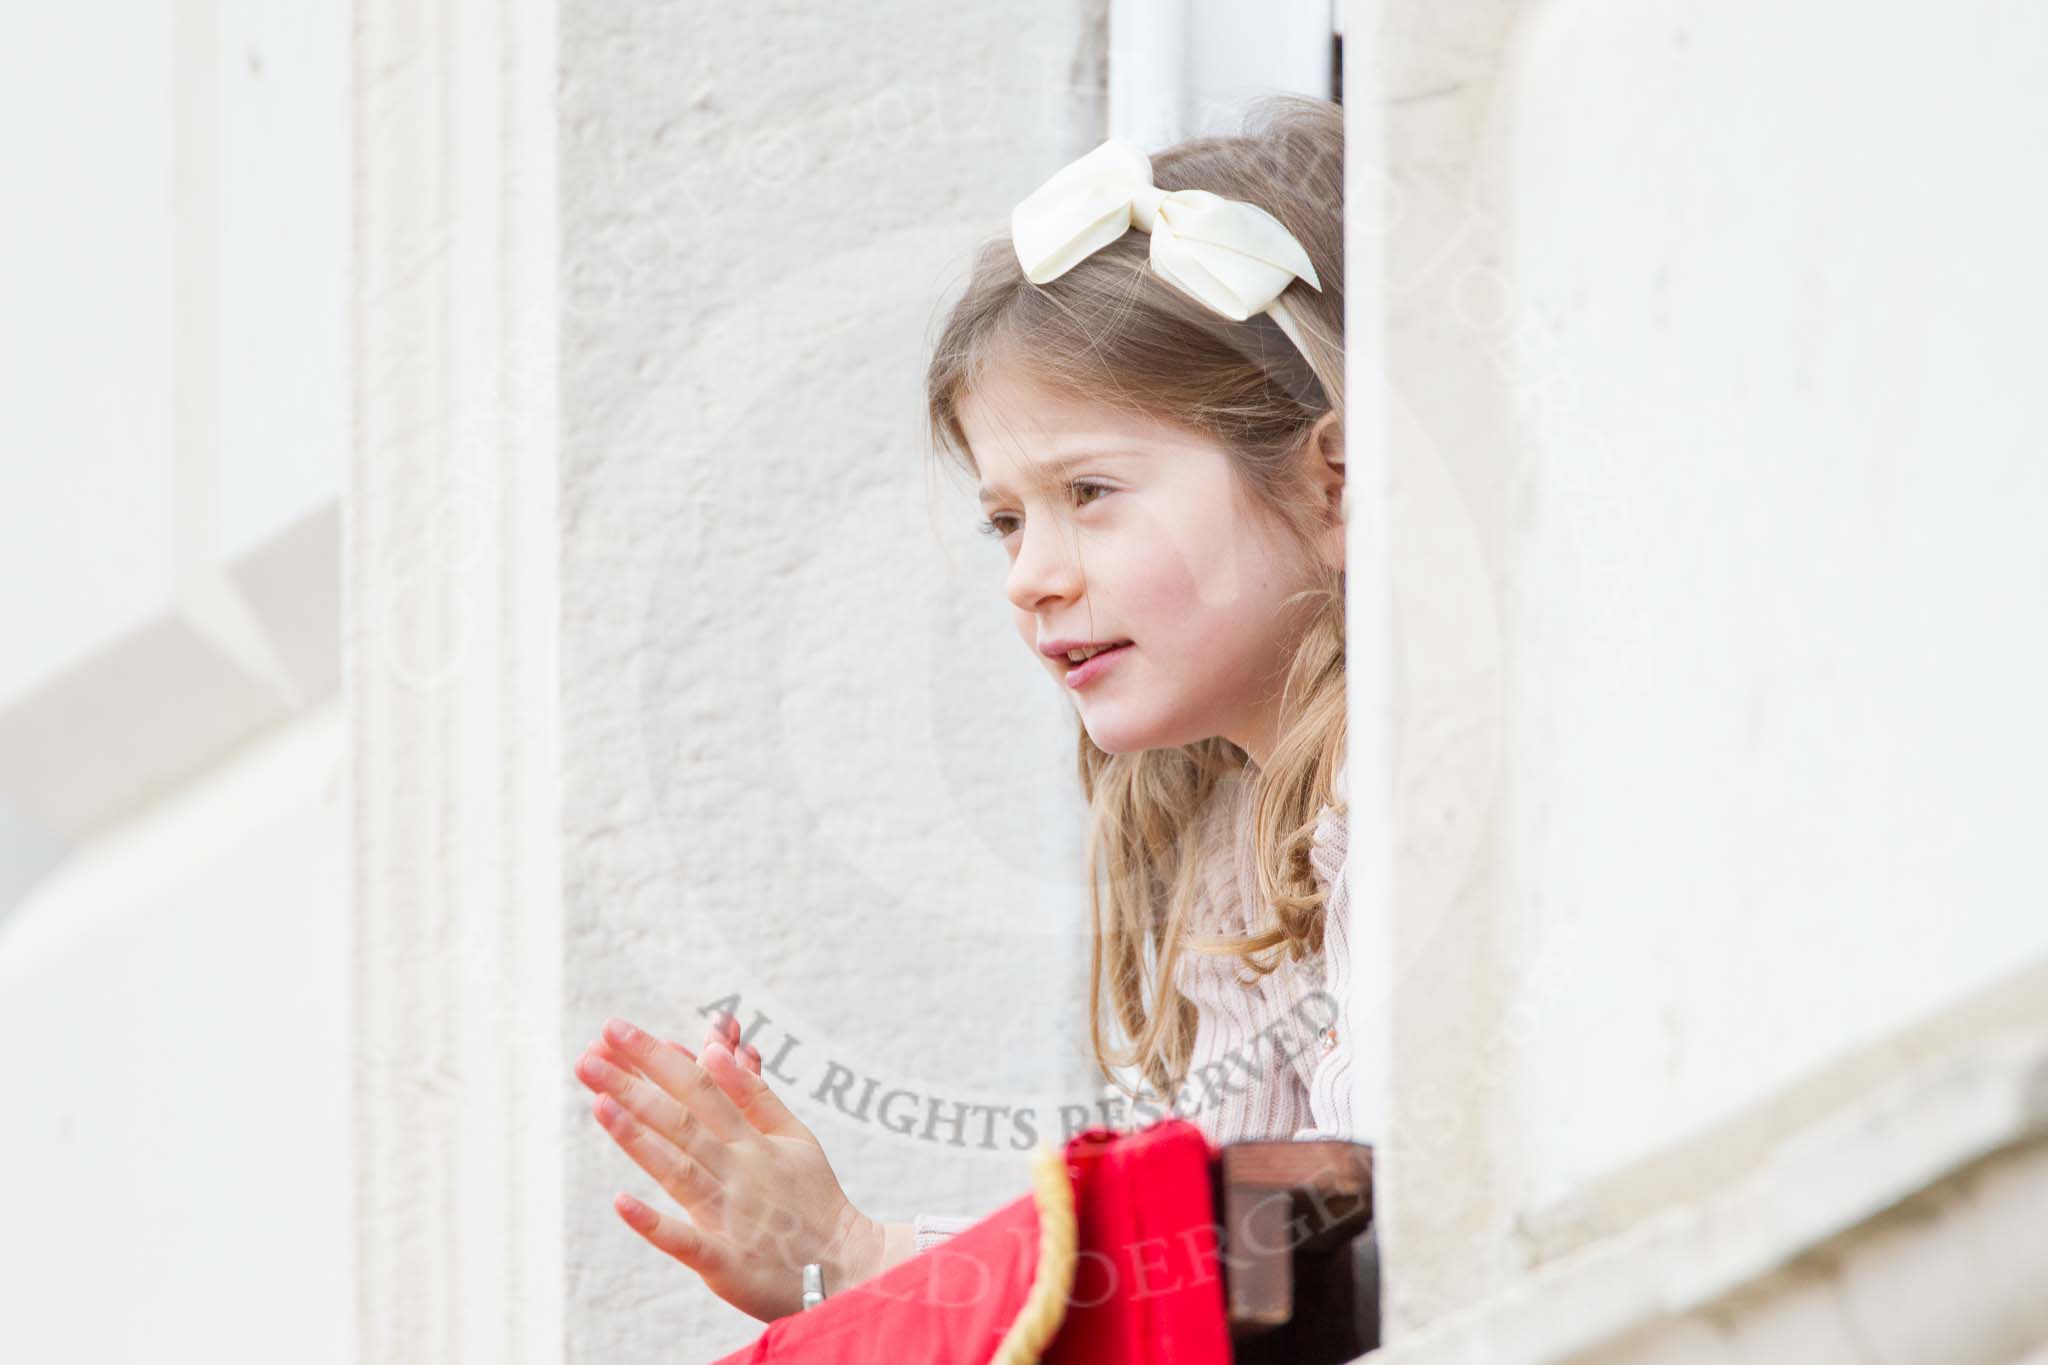 Trooping the Colour 2012: Looking out of the window of the Major General's Office - can anybody help with a name for the young lady, please?.
Horse Guards Parade, Westminster,
London SW1,

United Kingdom,
on 16 June 2012 at 11:10, image #263